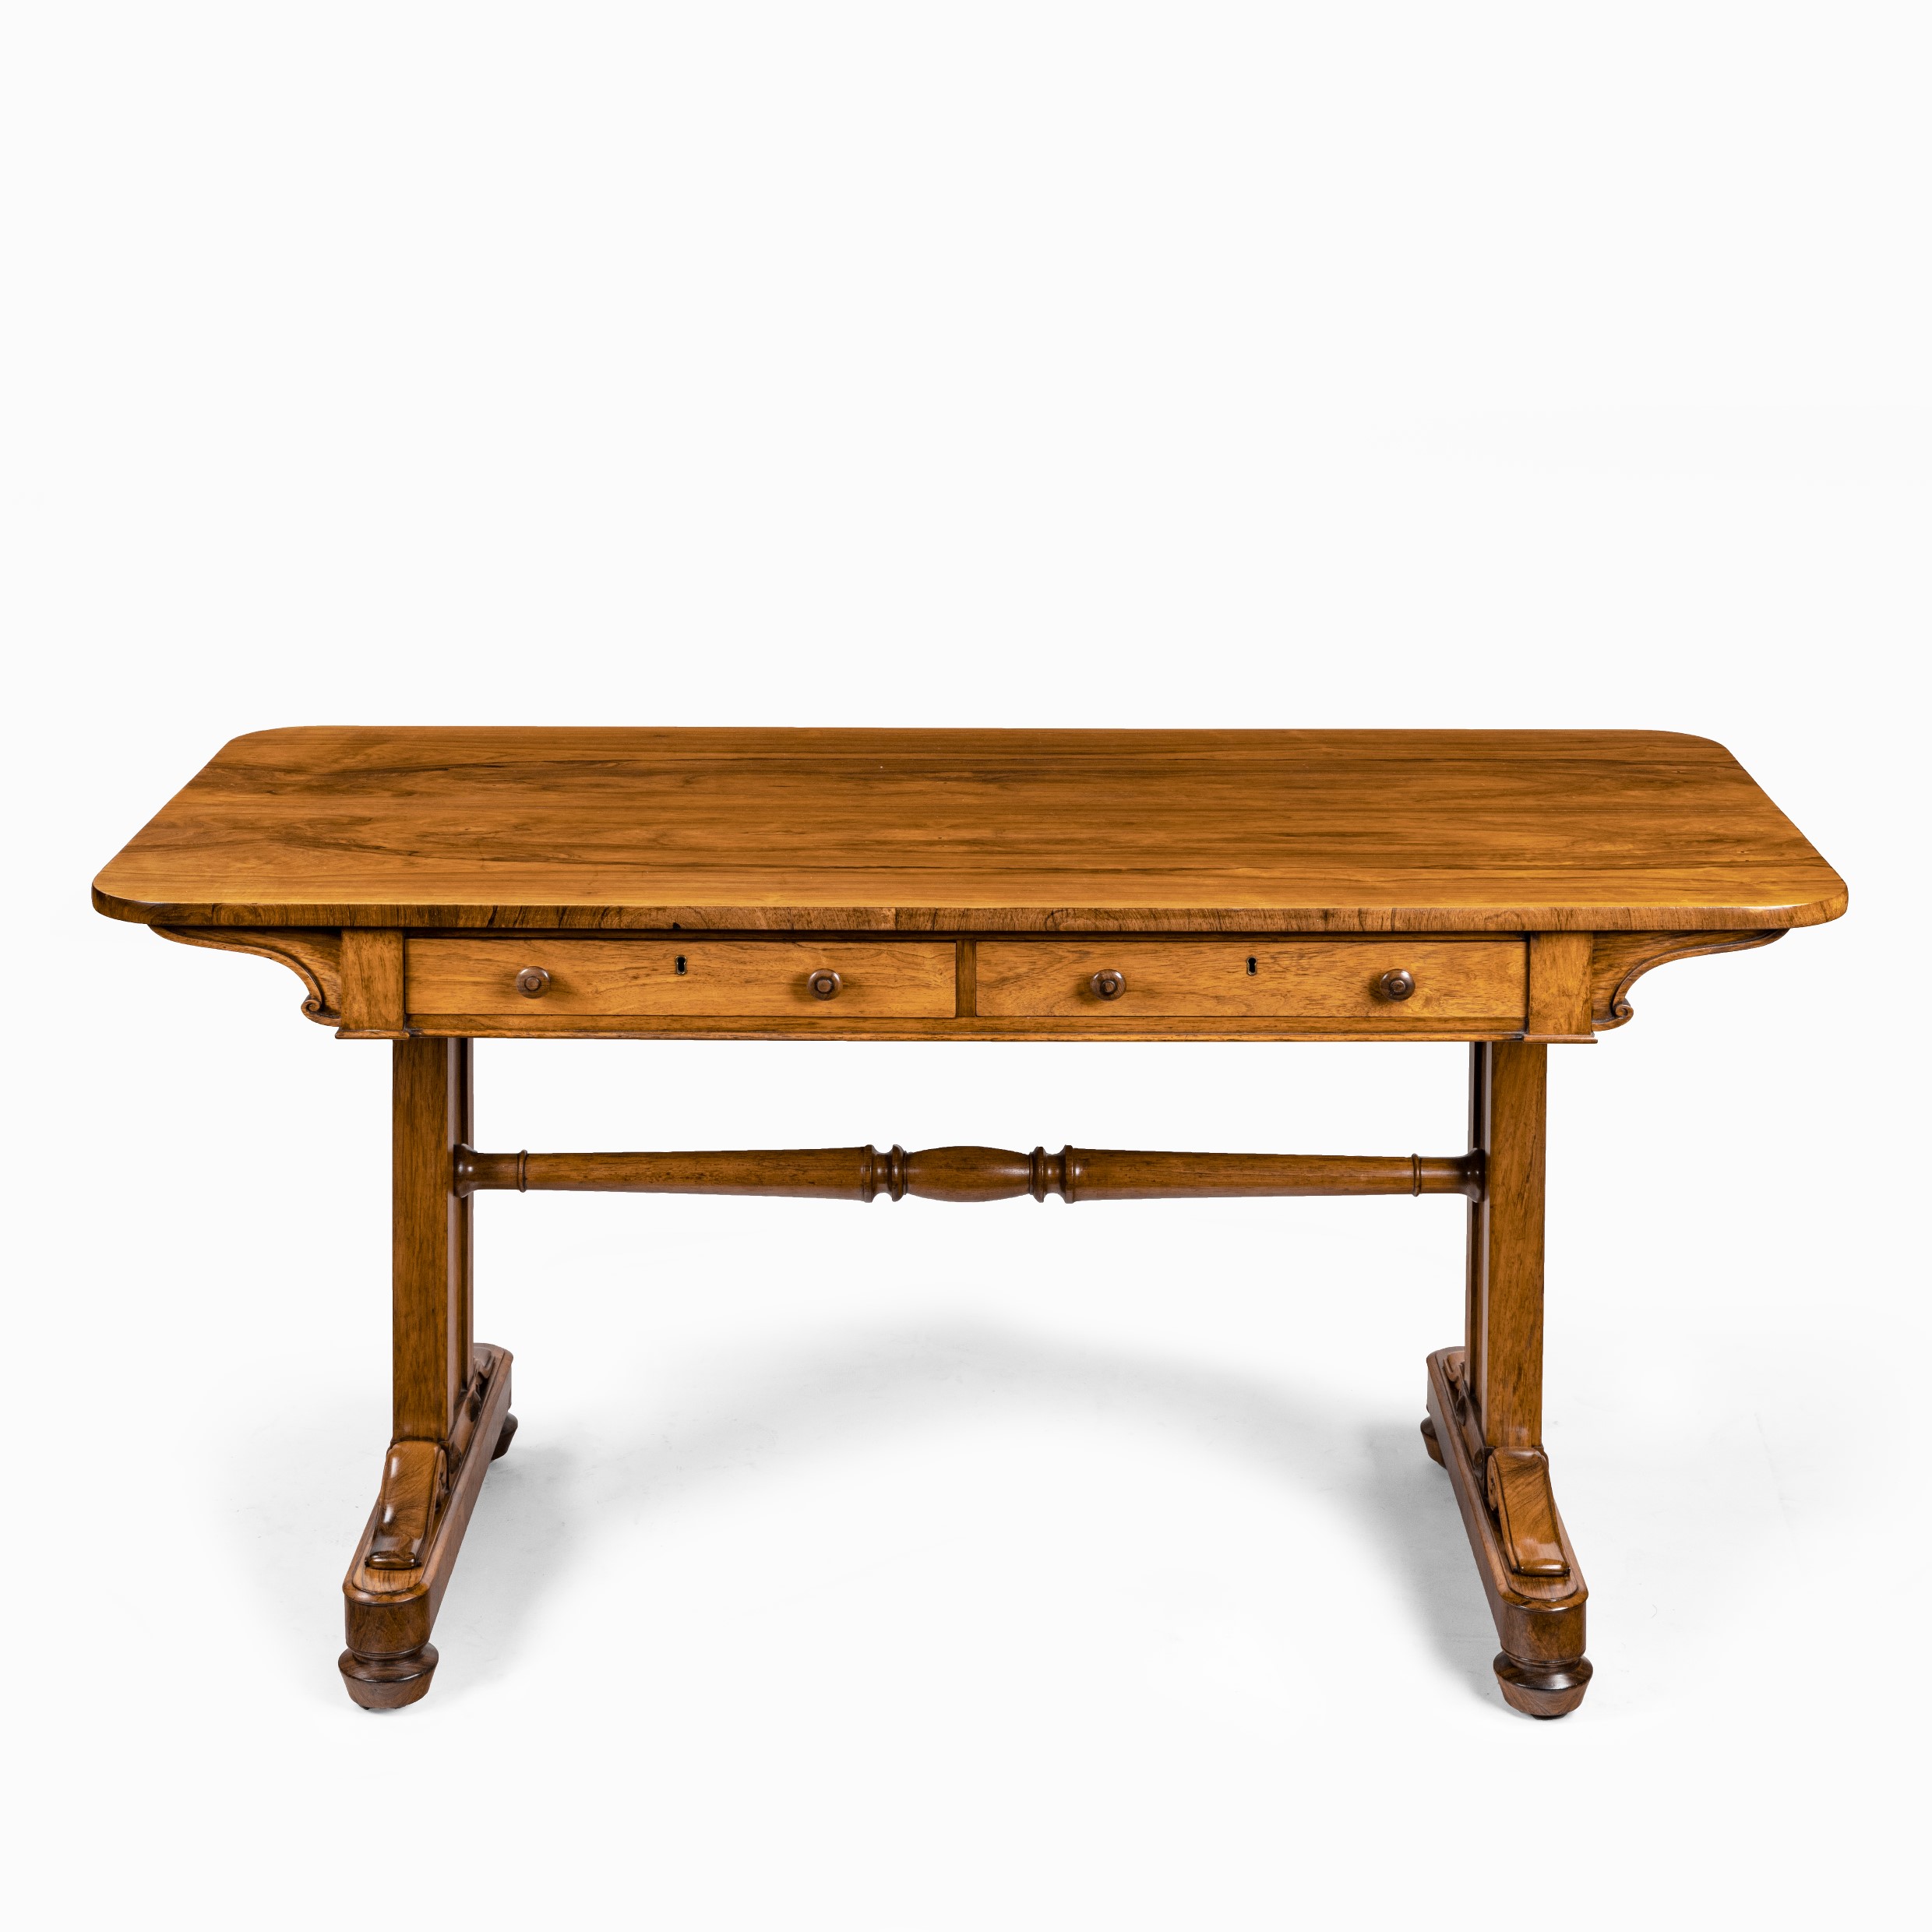 A late Regency rosewood end support table Gillows or Holland and Sons